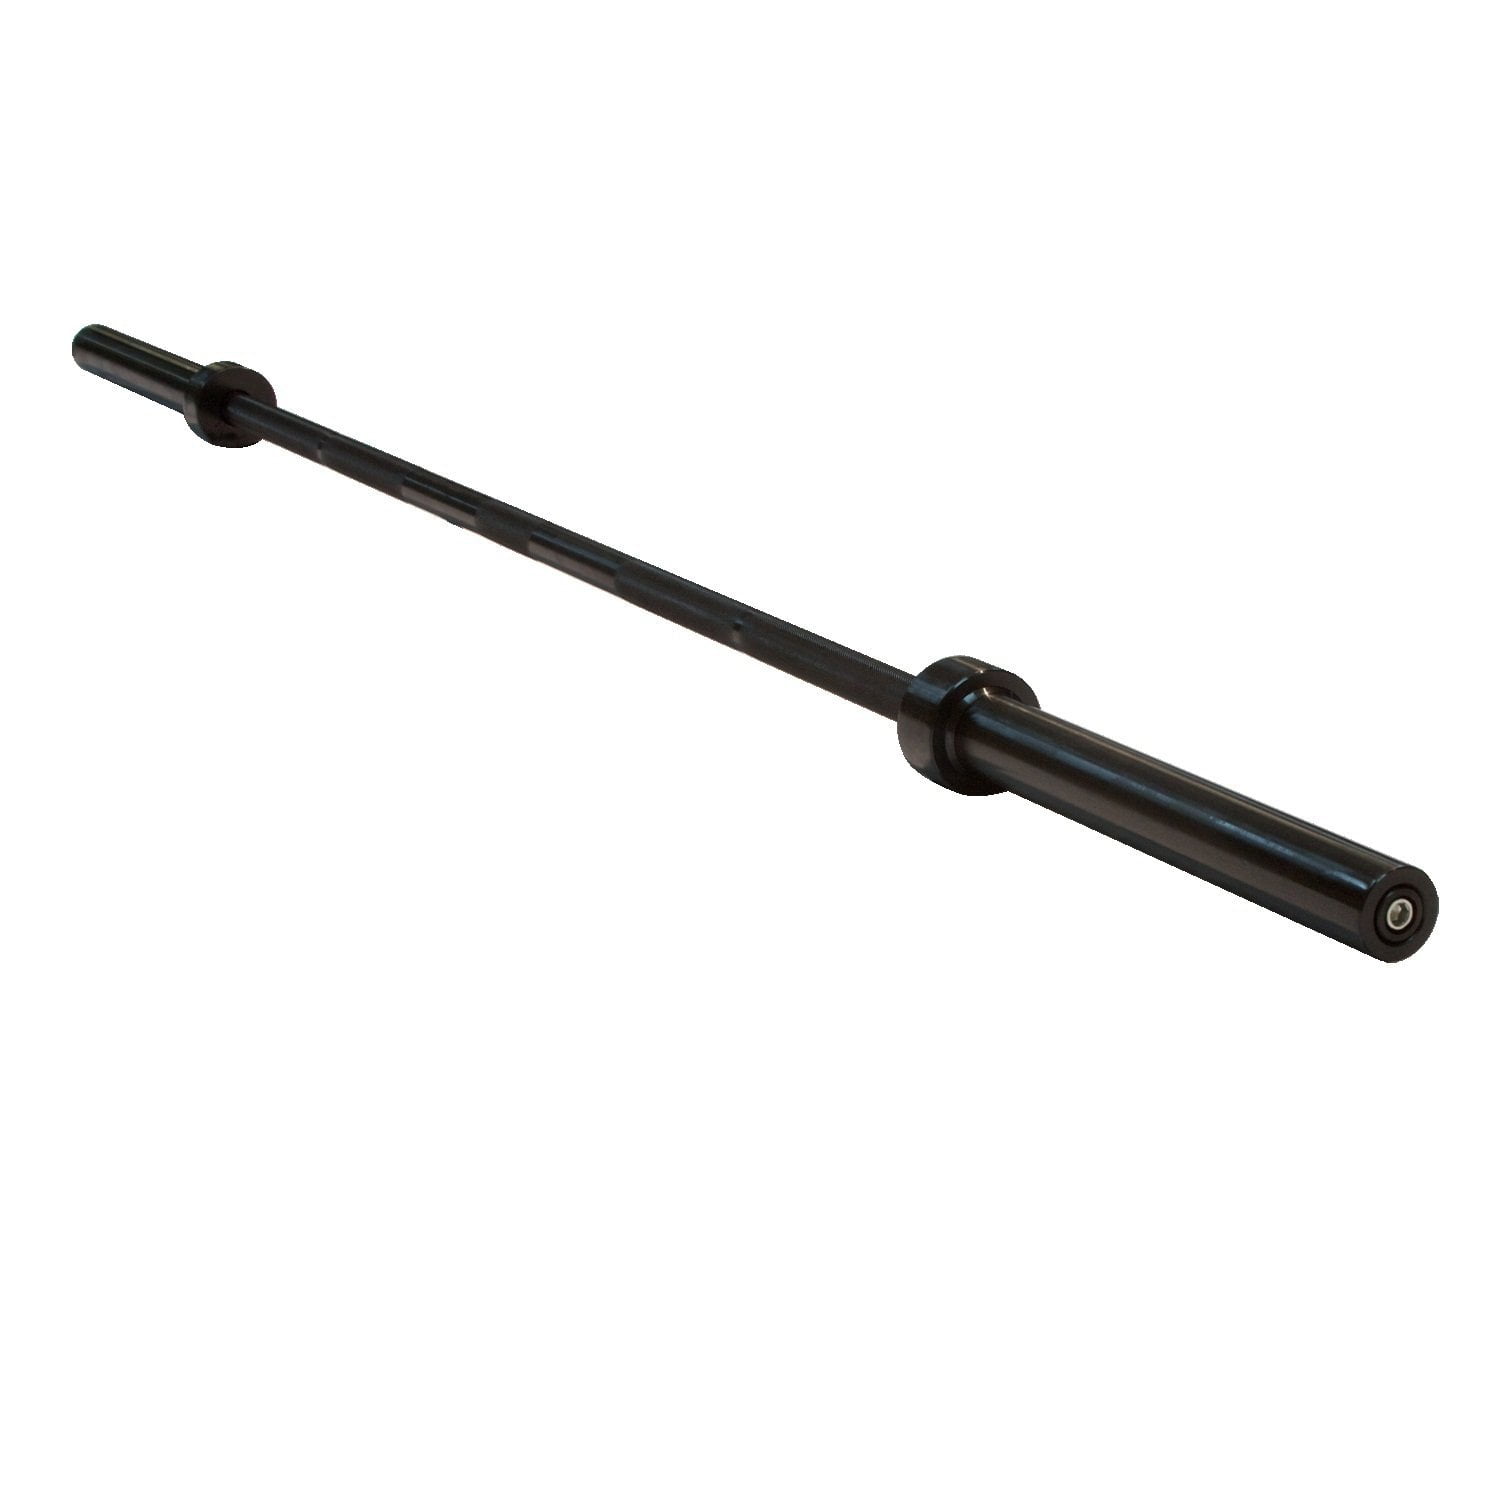 Olympic Barbell 7 Ft Bar 700lb Capacity 45 lbs Pounds 